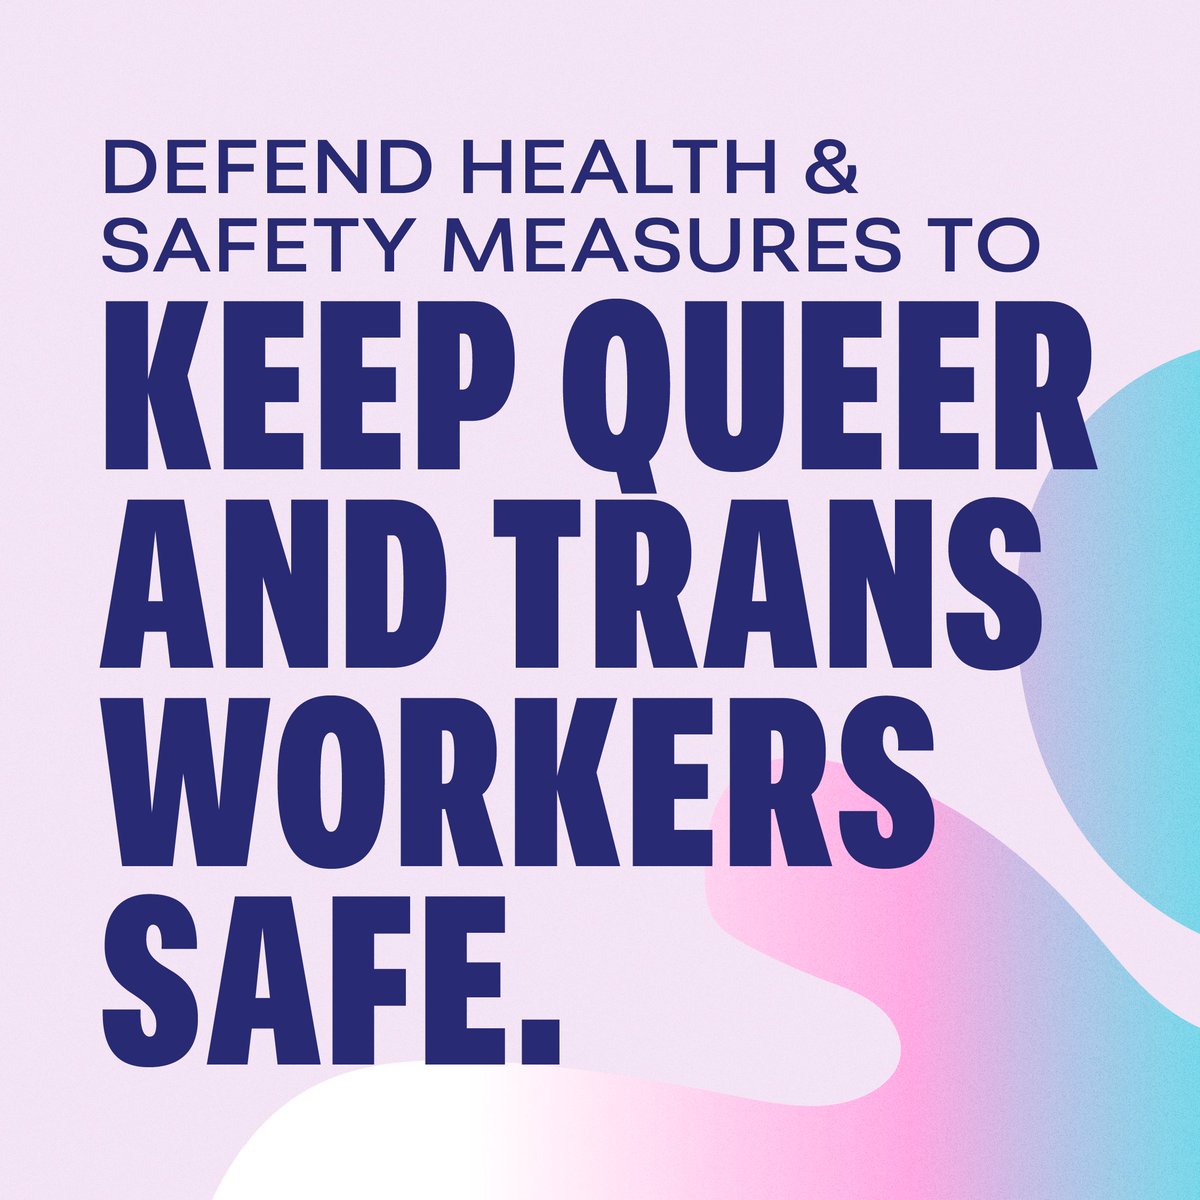 CUPW and its members recognize #IDAHOBIT by demanding that all parties take action to eliminate harassment and violence against 2SLGTBQI+ workers. Ending harassment and violence at work is a collective responsibility. Let’s unite against hate.